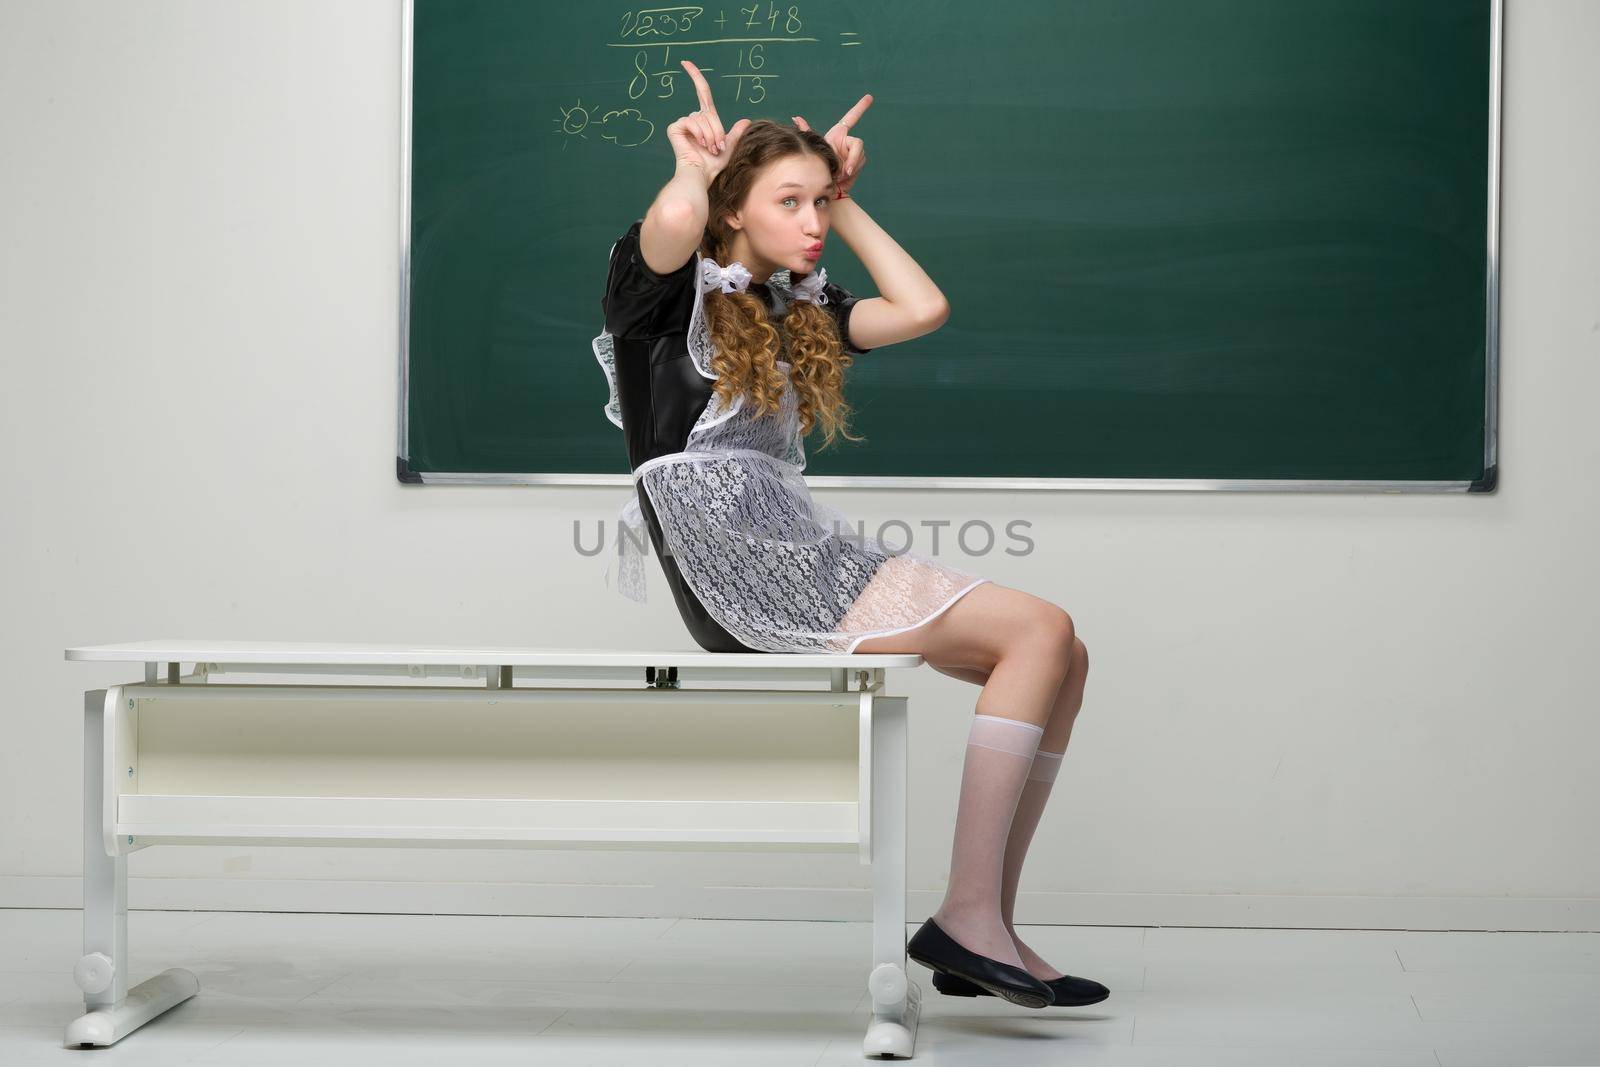 Joyful happy girl student sitting at the desk. Smiling pretty shoolgirl with braided in two plaits hair wearing retro soviet school uniform sitting on desk in front of blackboard